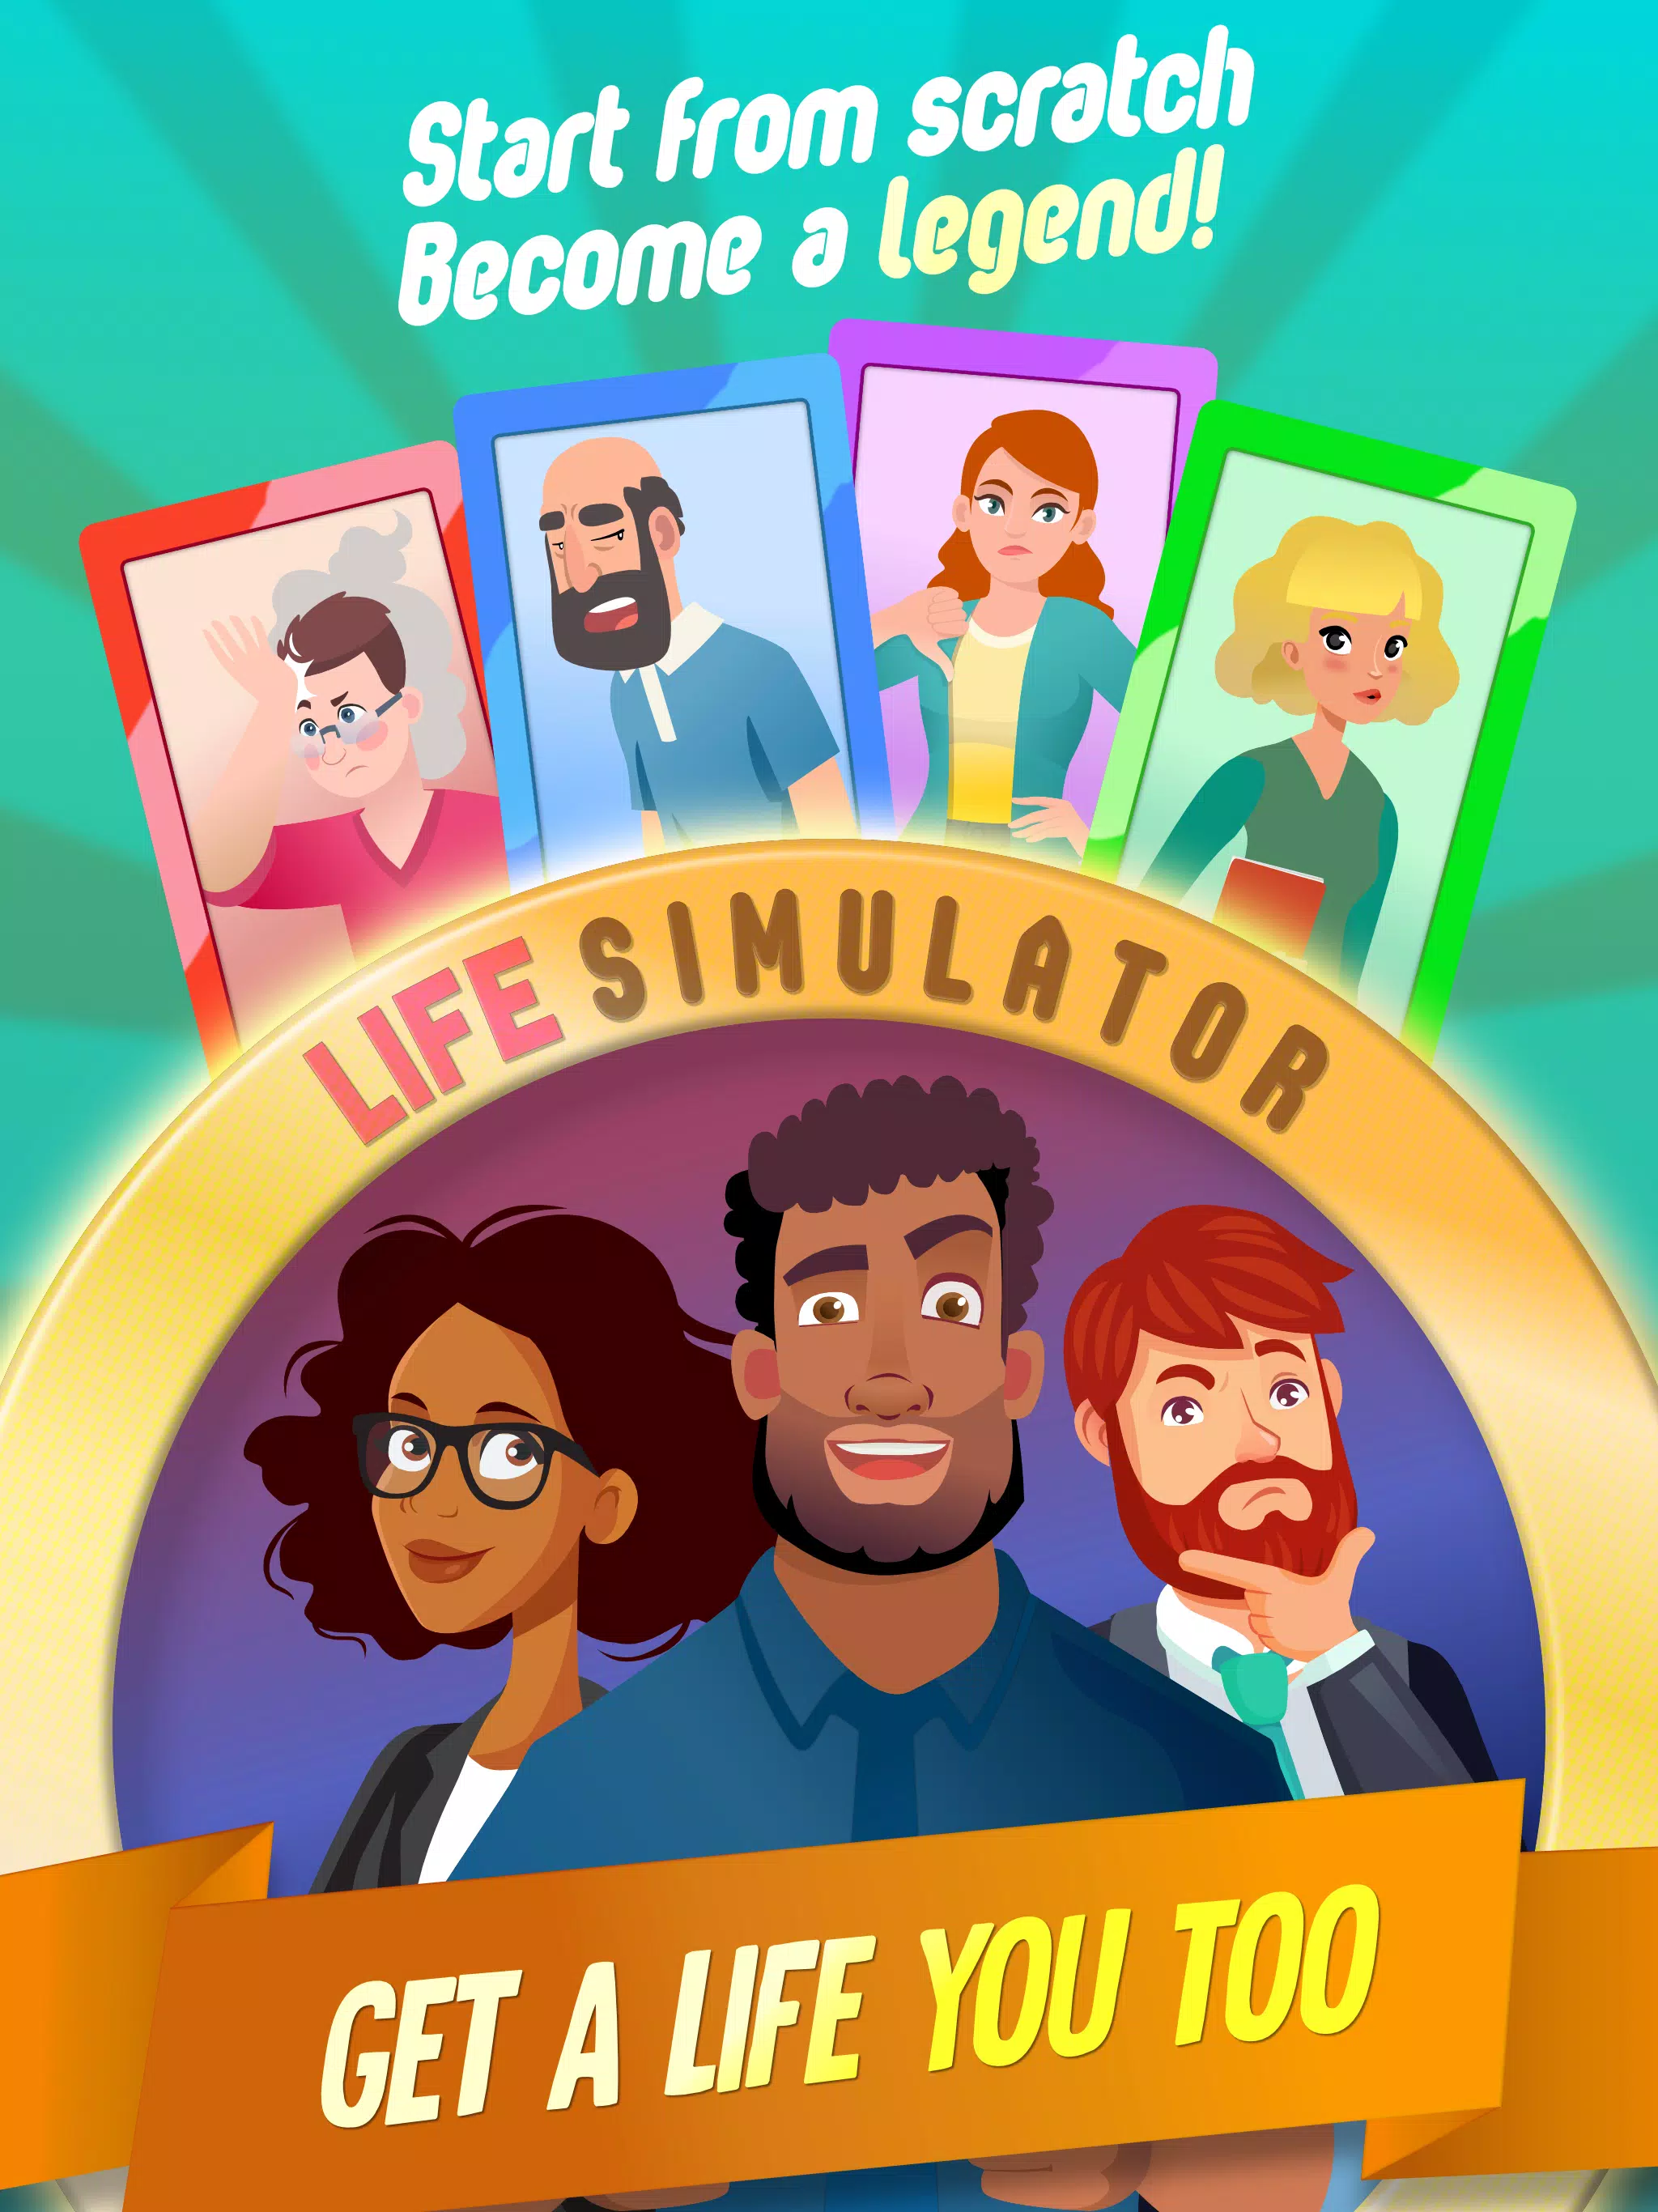 Download r life Simulator android on PC